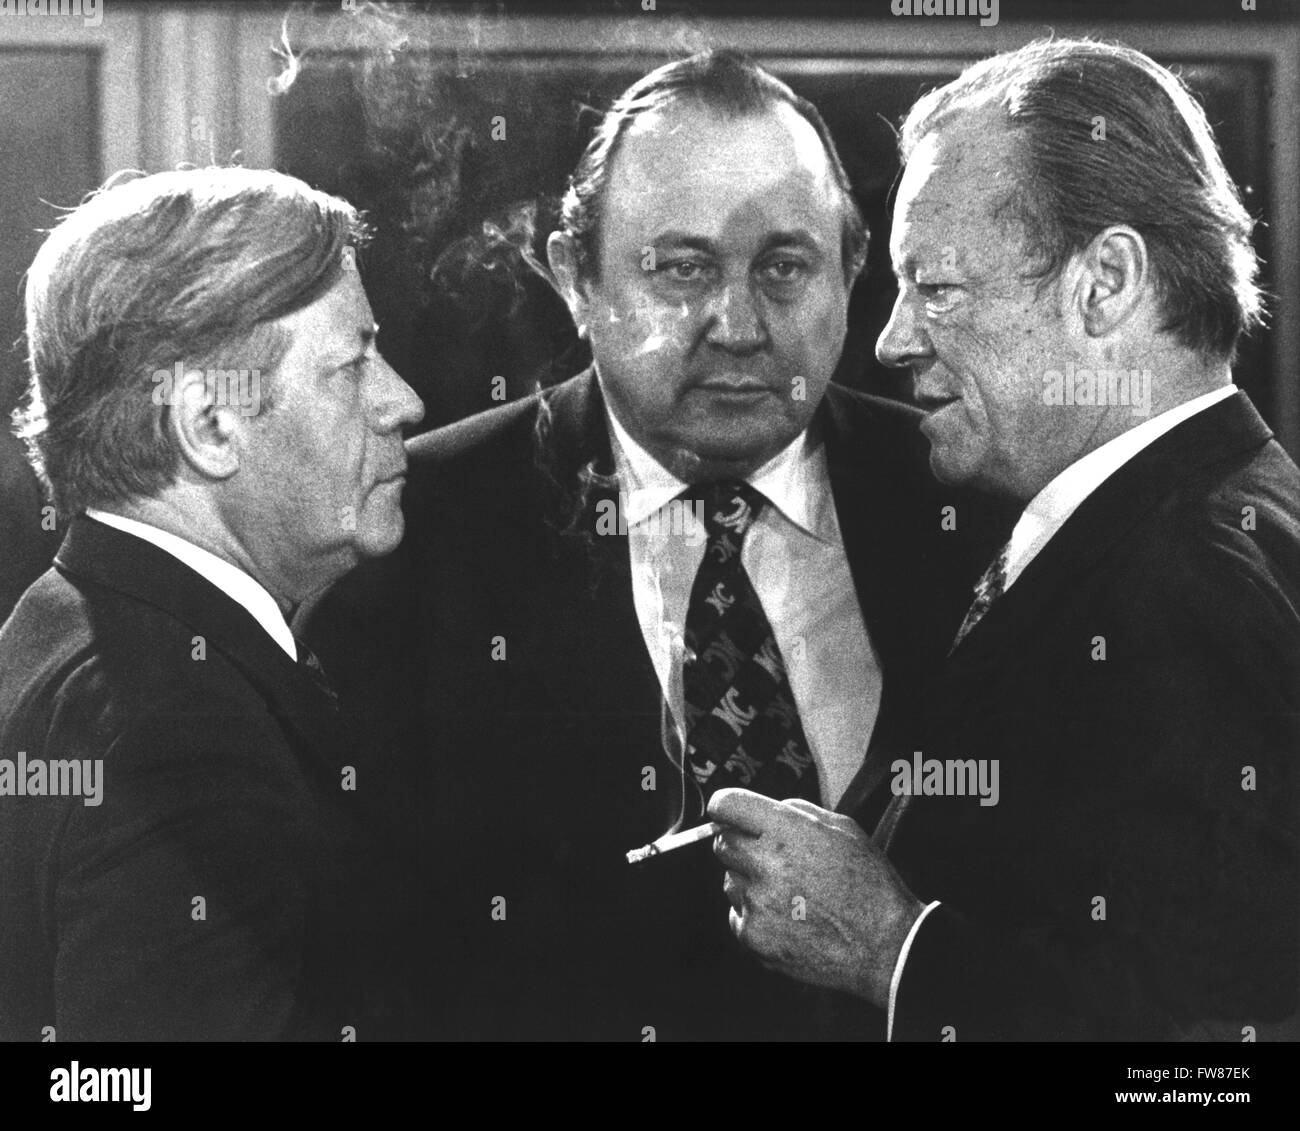 Chancellor Helmut Schmidt (SPD), foreign minister Hans-Dietrich Genscher (FDP) and SPD chairman Willy Brandt (l-r) talk to each other on 13 December 1976 shortly before the beginning of a meeting. Stock Photo